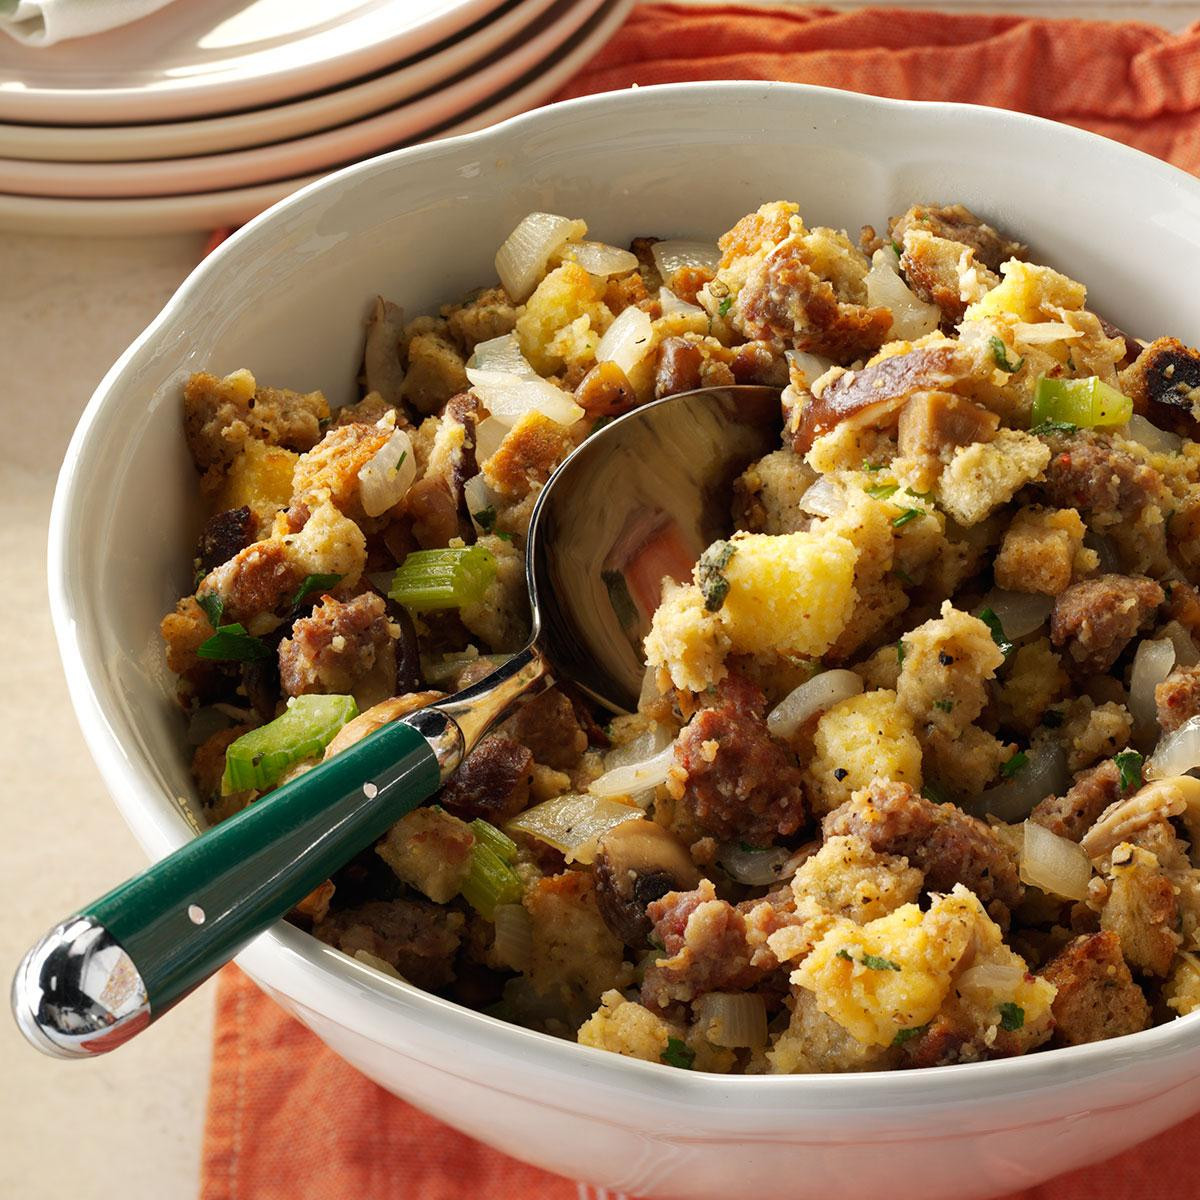 Italian Thanksgiving Side Dishes
 "Everything" Stuffing Recipe